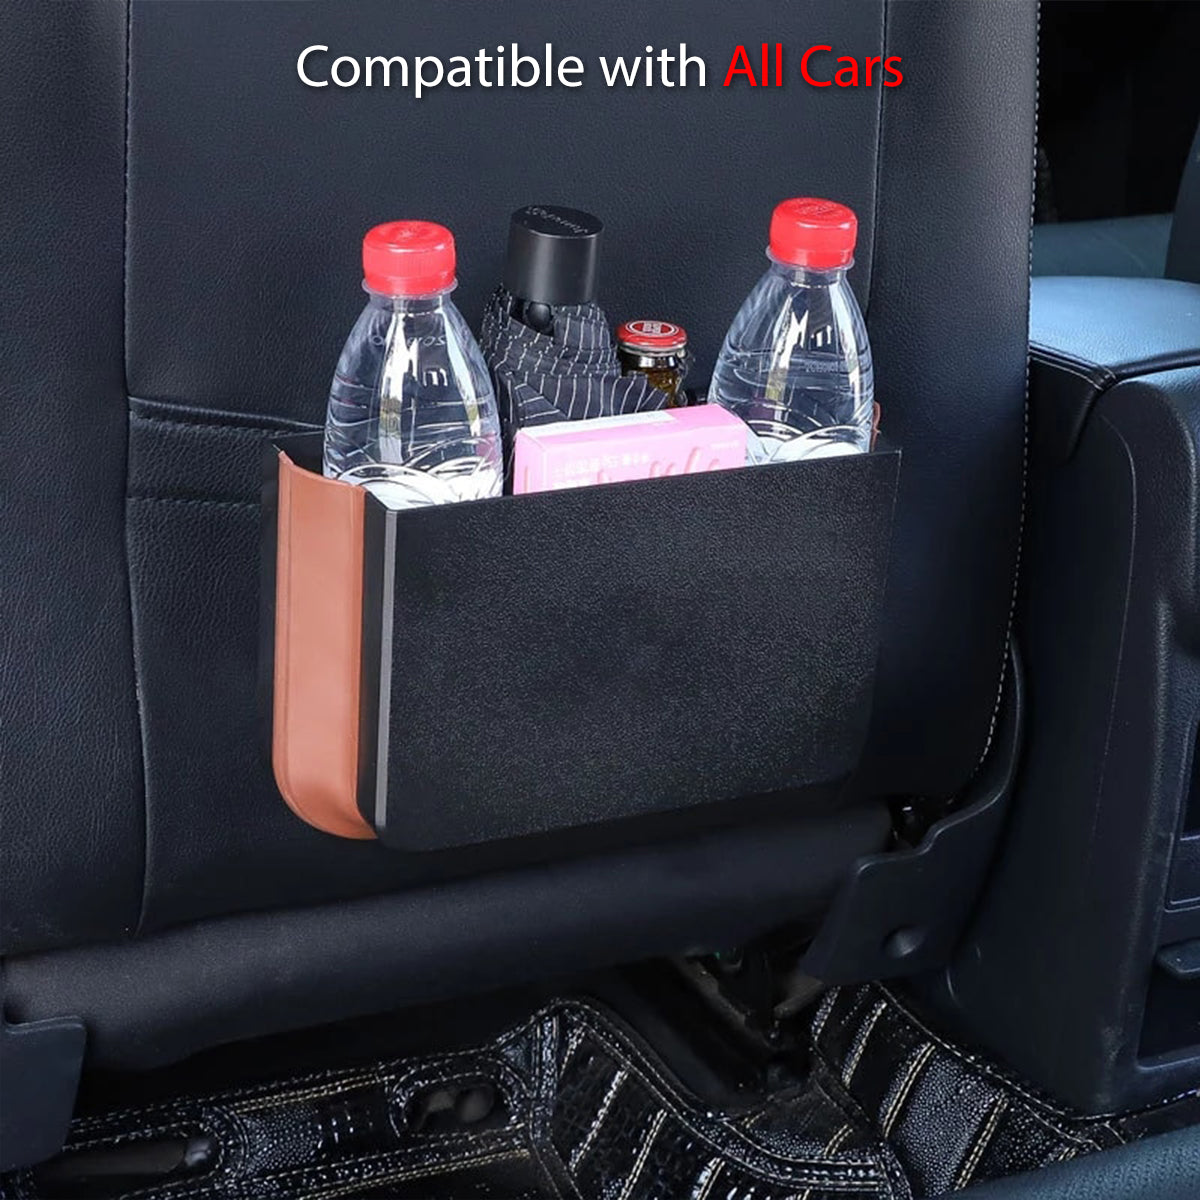 Hanging Waterproof Car Trash can-Foldable, Custom For Your Cars, Waterproof, and Equipped with Cup Holders and Trays. Multi-Purpose, Car Accessories JE11992